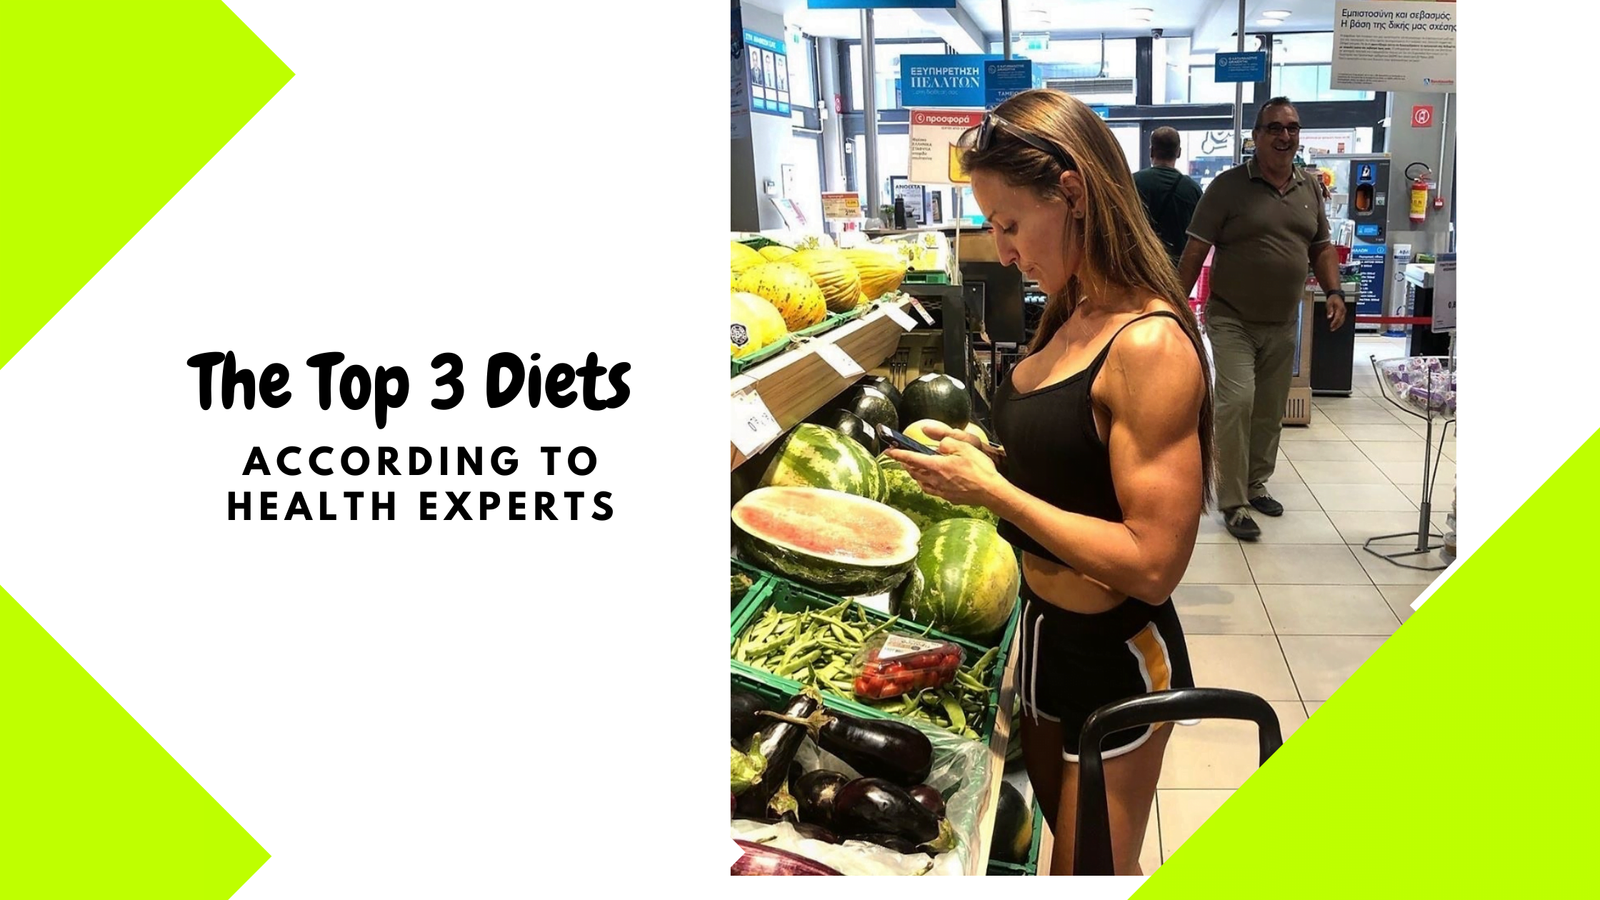 The Top 3 Diets